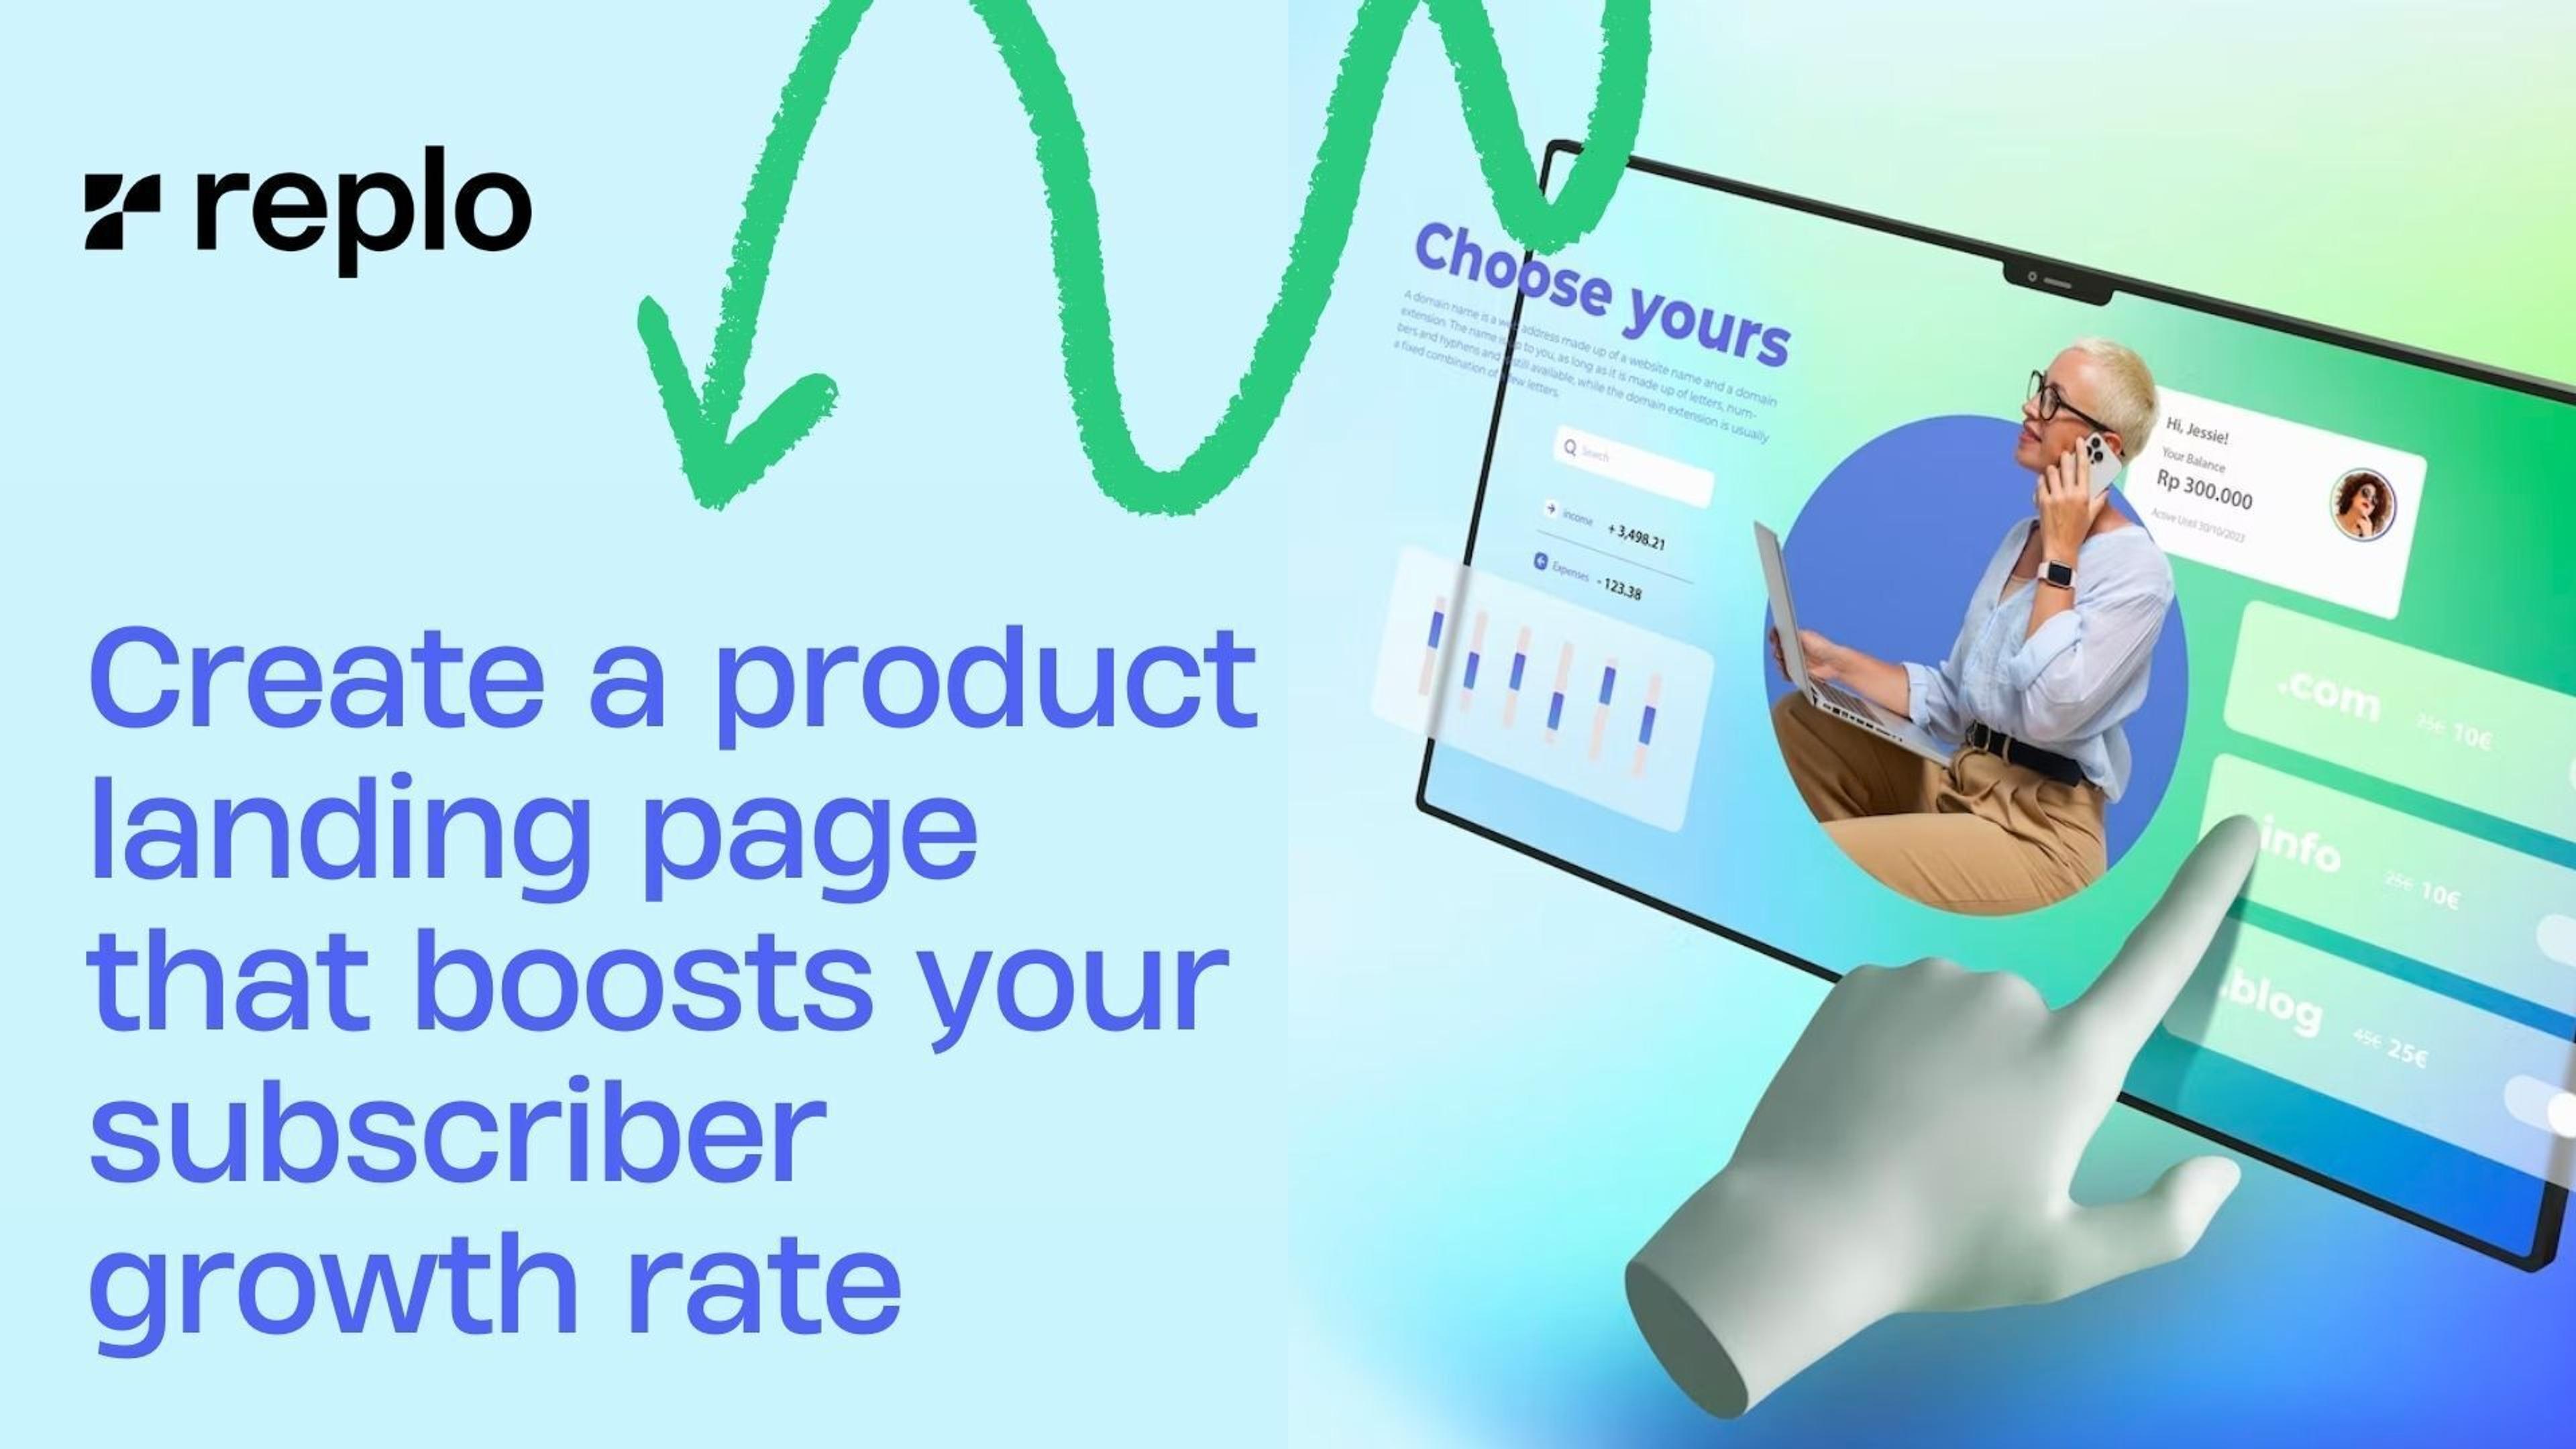 Create a product landing page that boosts your subscriber growth rate